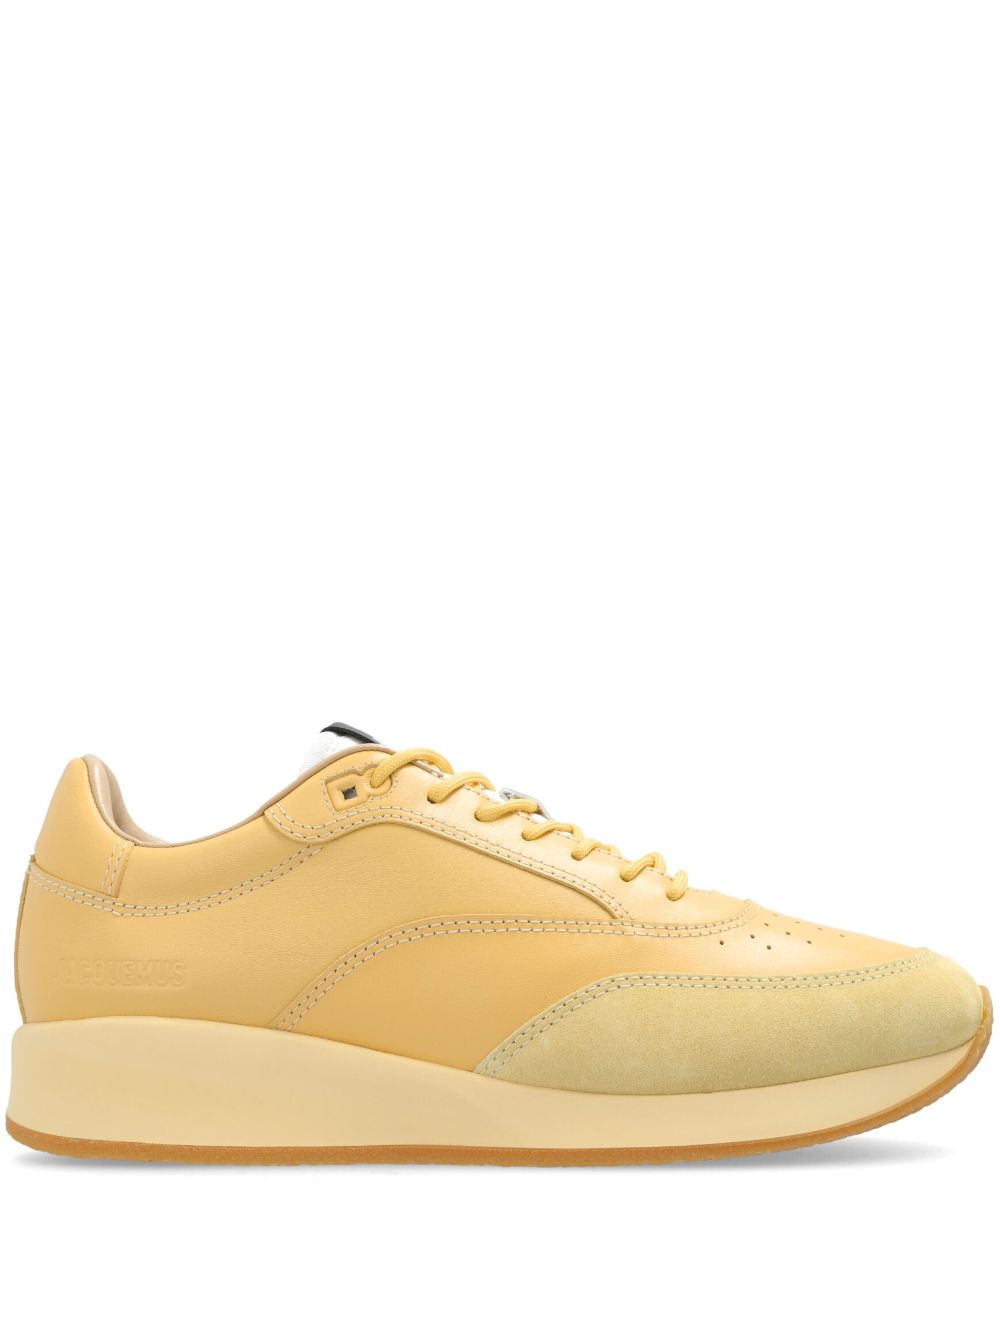 Jacquemus panelled lace-up sneakers - Yellow von Jacquemus